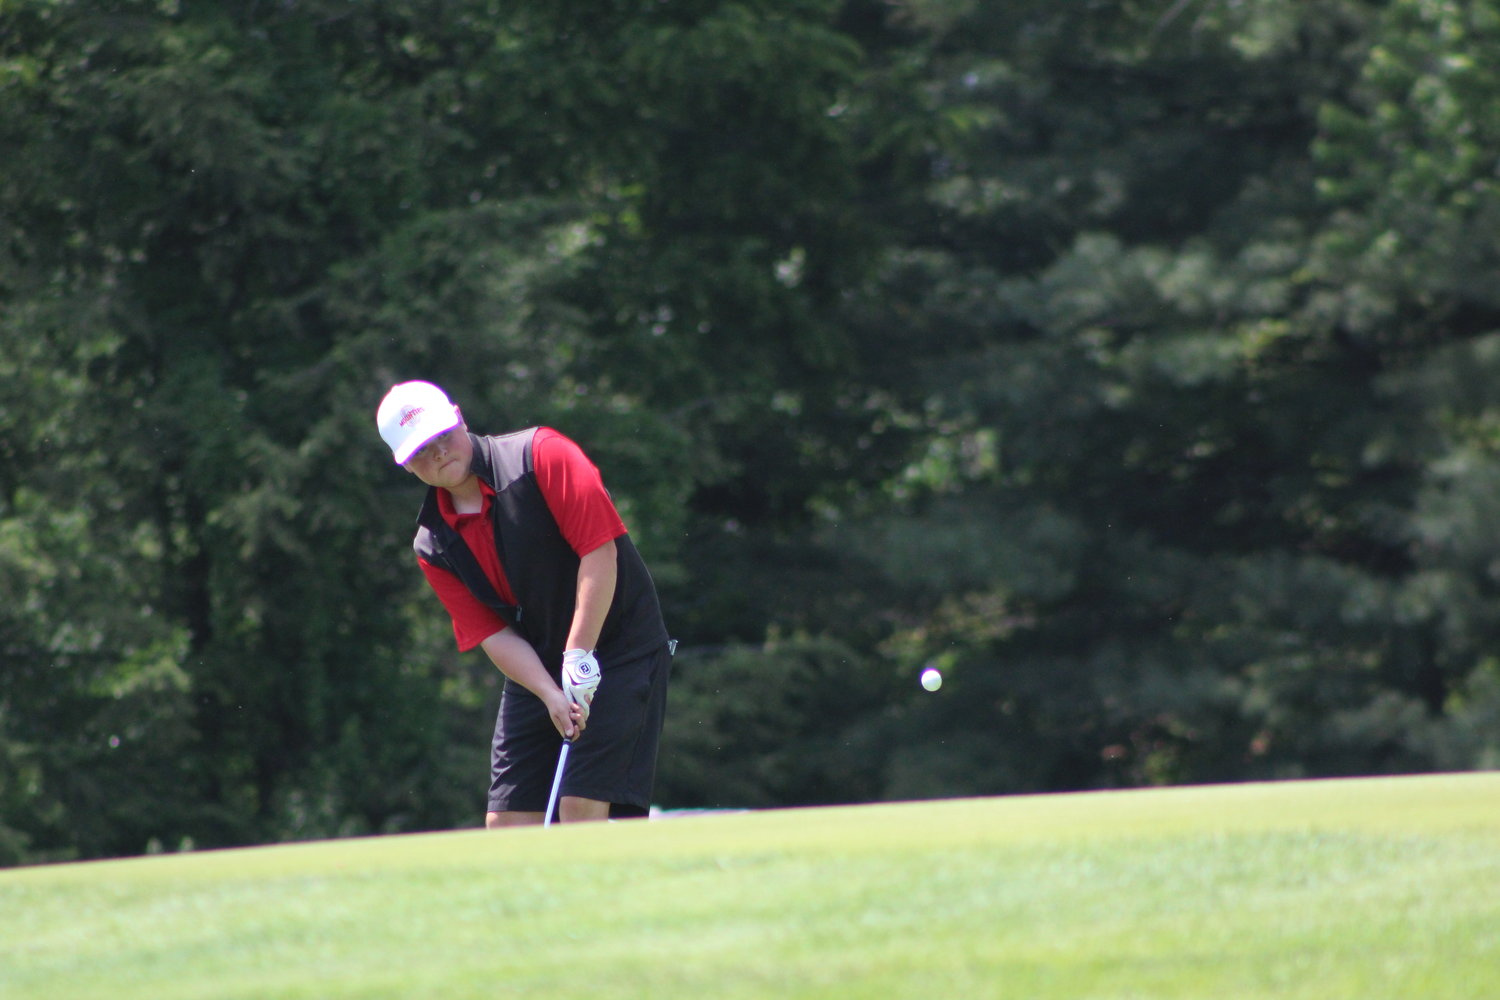 Junior Nolan Allen tied for the second lowest score (78) at the Regional as he helped the Mounties capture the sectional crown.